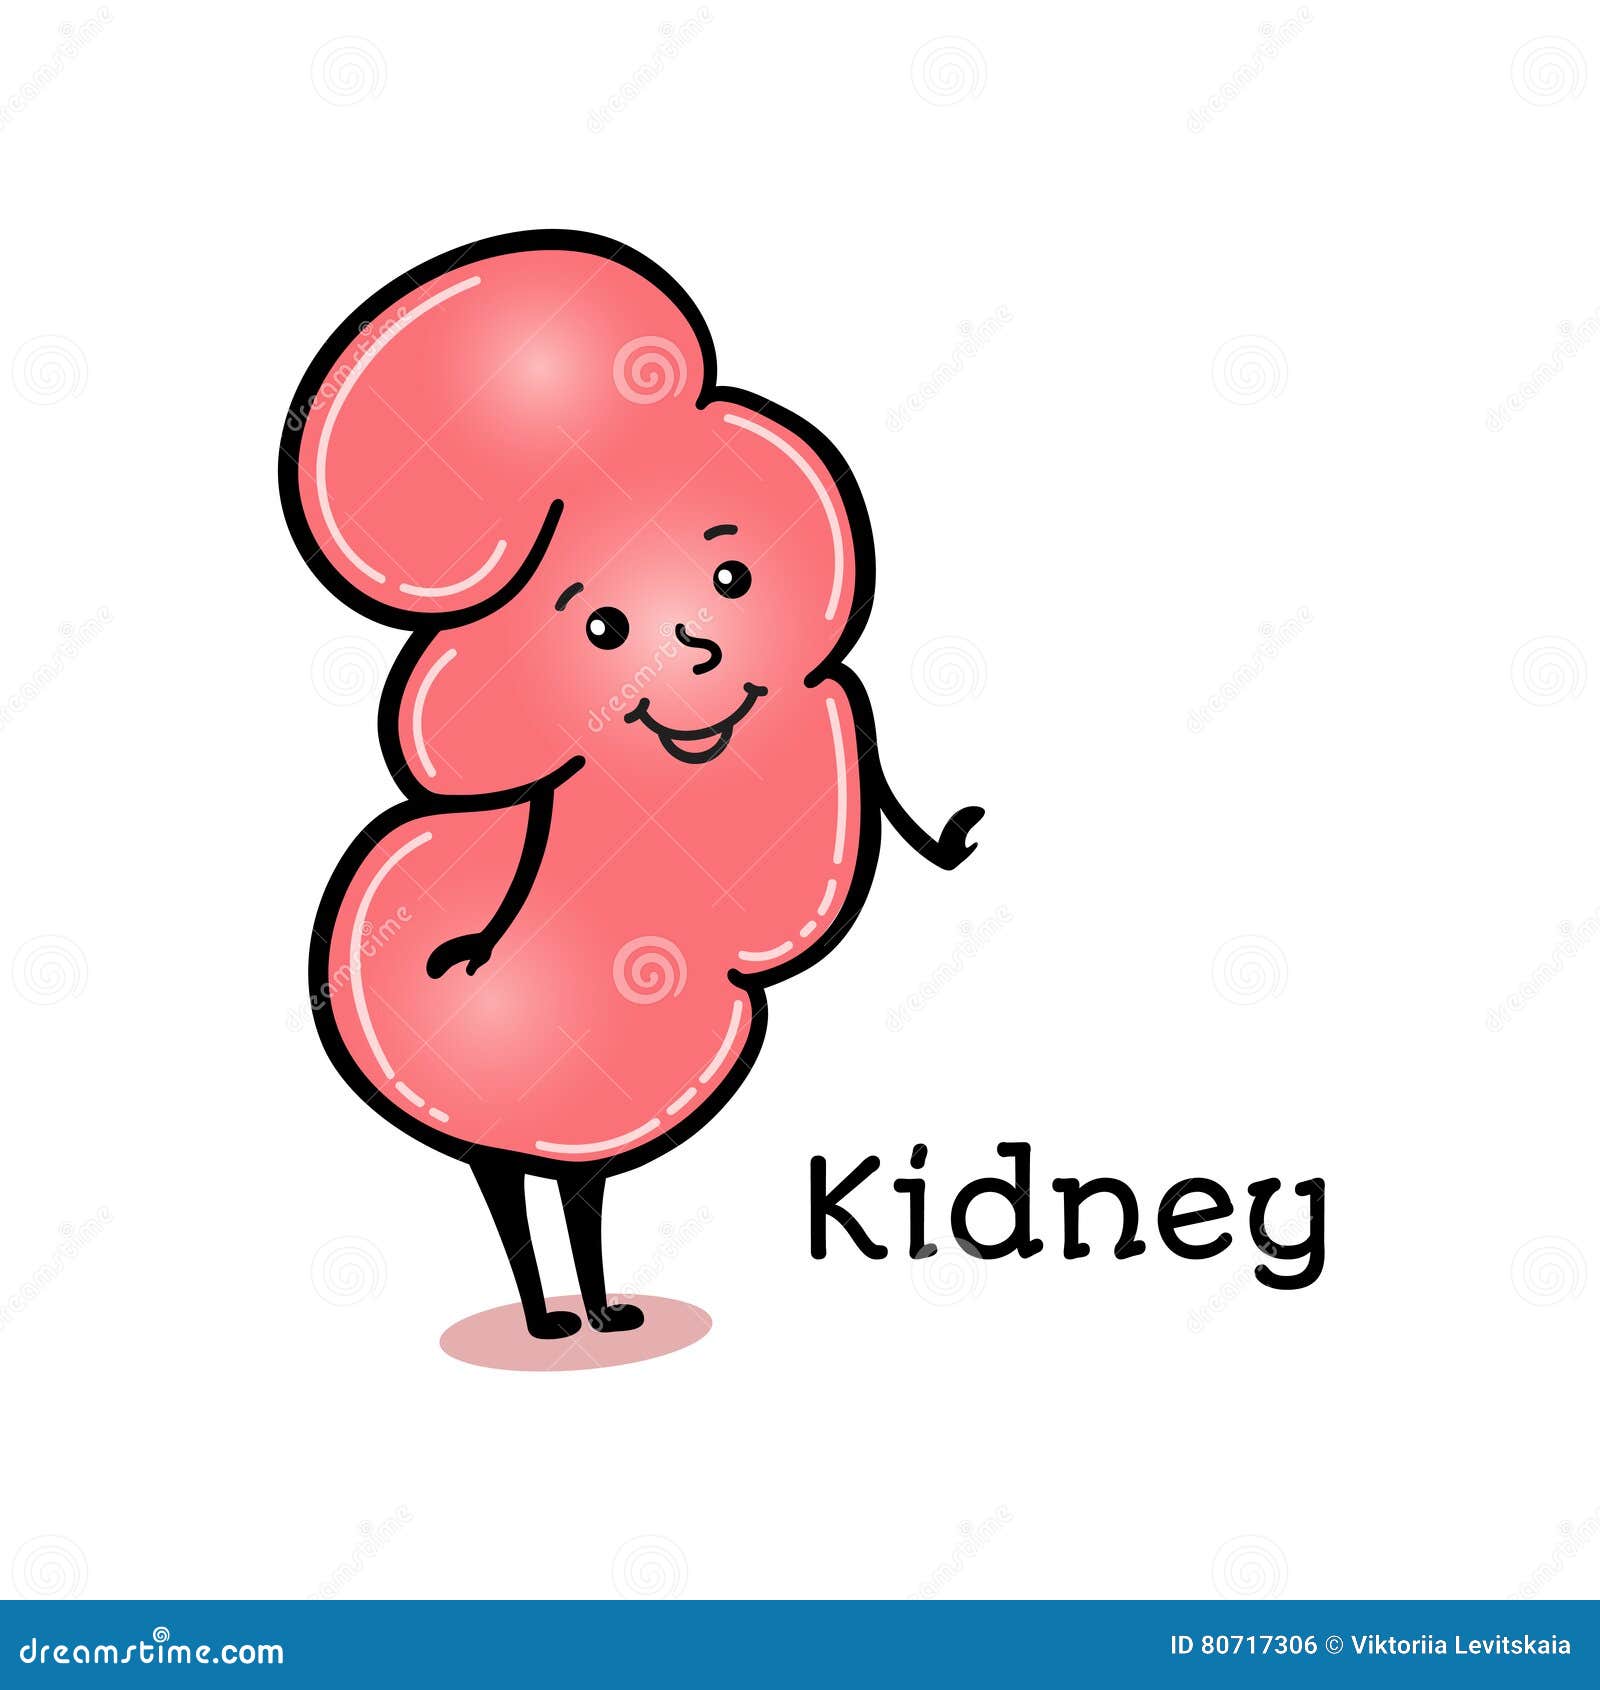 funny kidney clipart - photo #6